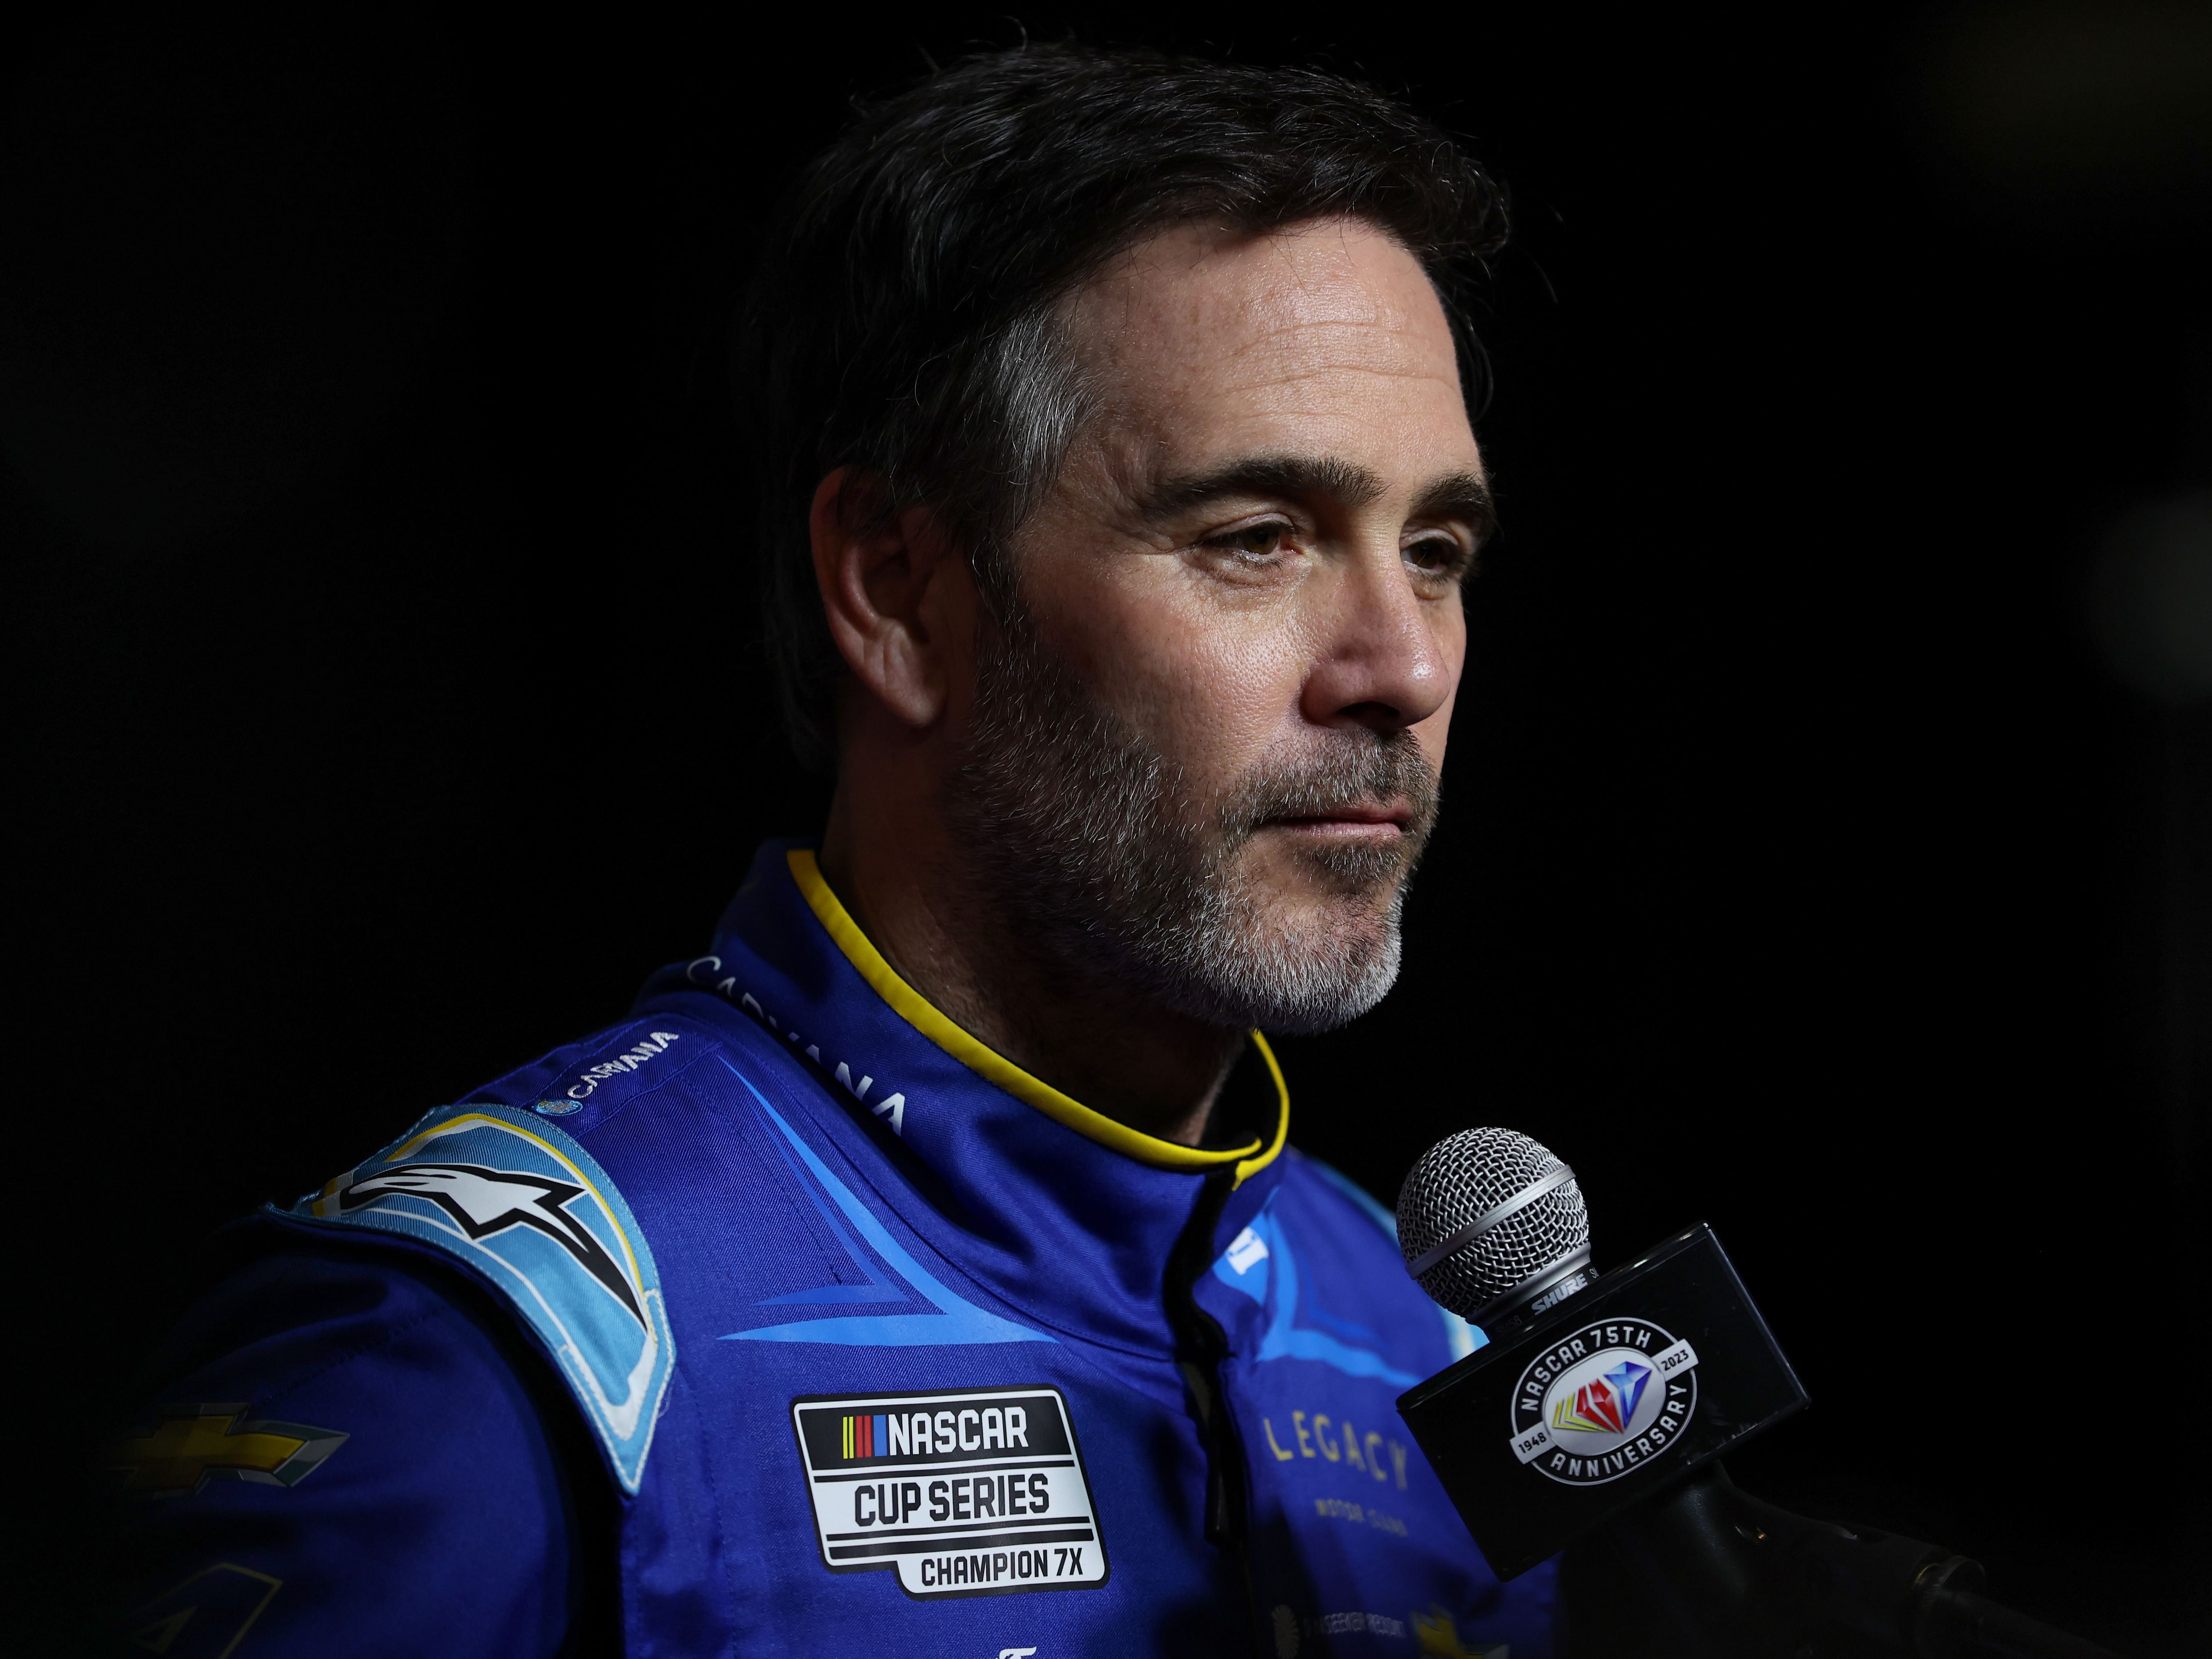 Jimmie Johnson, driver of the #84 Carvana Chevrolet, speaks to the media during the NASCAR Cup Series 65th Annual Daytona 500 Media Day at Daytona International Speedway on February 15, 2023 in Daytona Beach, Florida. (Photo by James Gilbert/Getty Images)